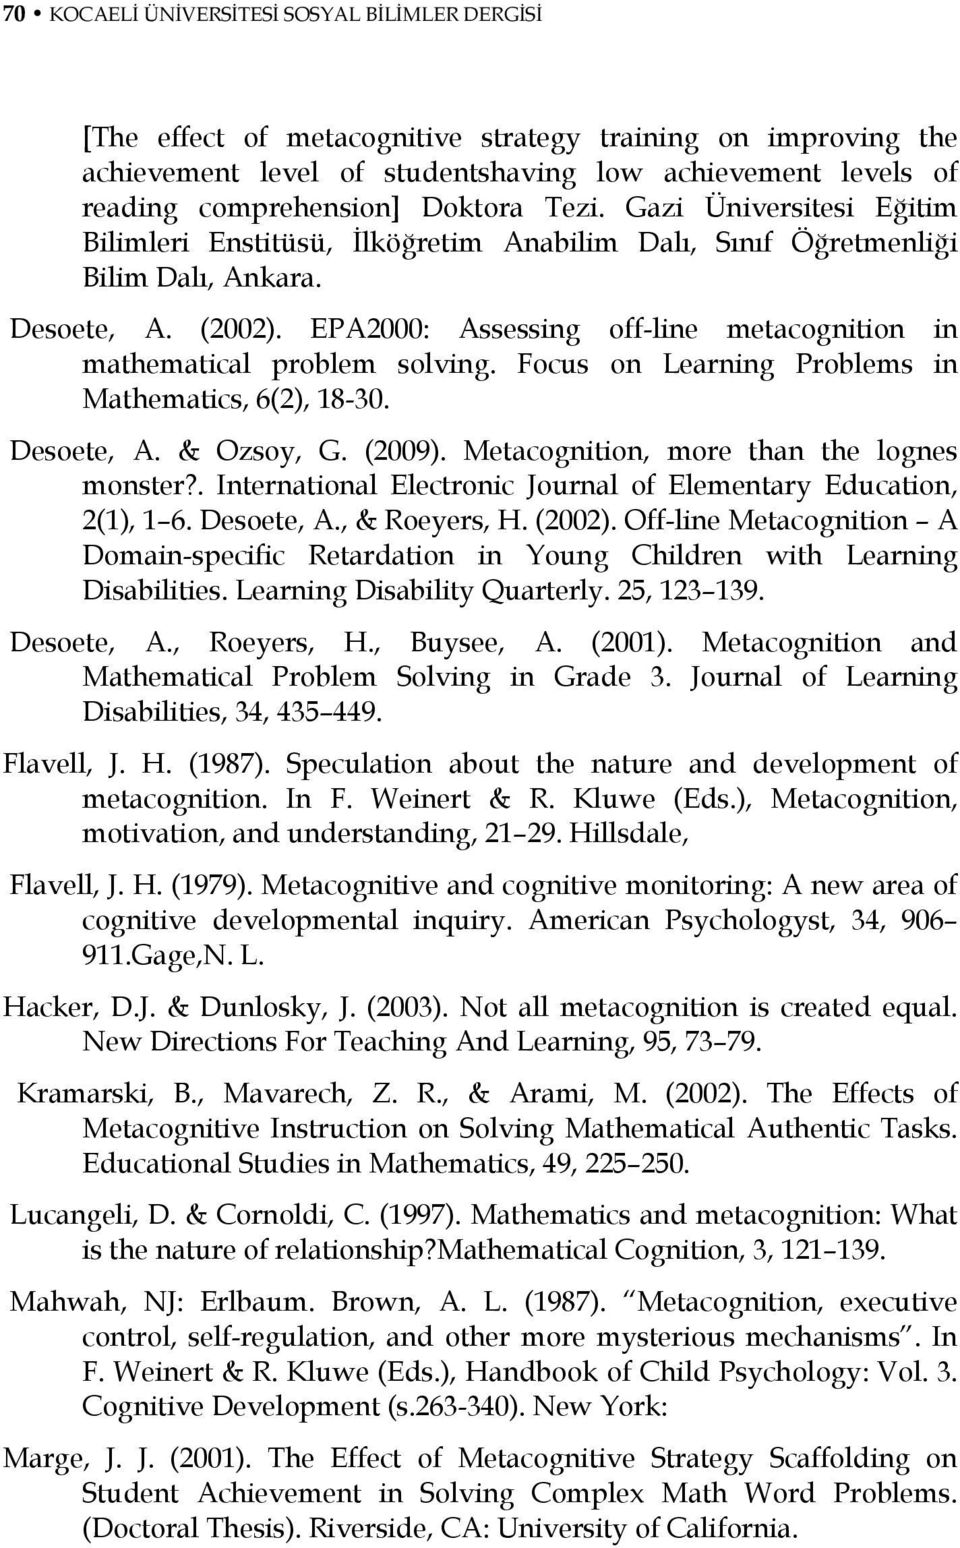 EPA2000: Assessing off-line metacognition in mathematical problem solving. Focus on Learning Problems in Mathematics, 6(2), 18-30. Desoete, A. & Ozsoy, G. (2009).